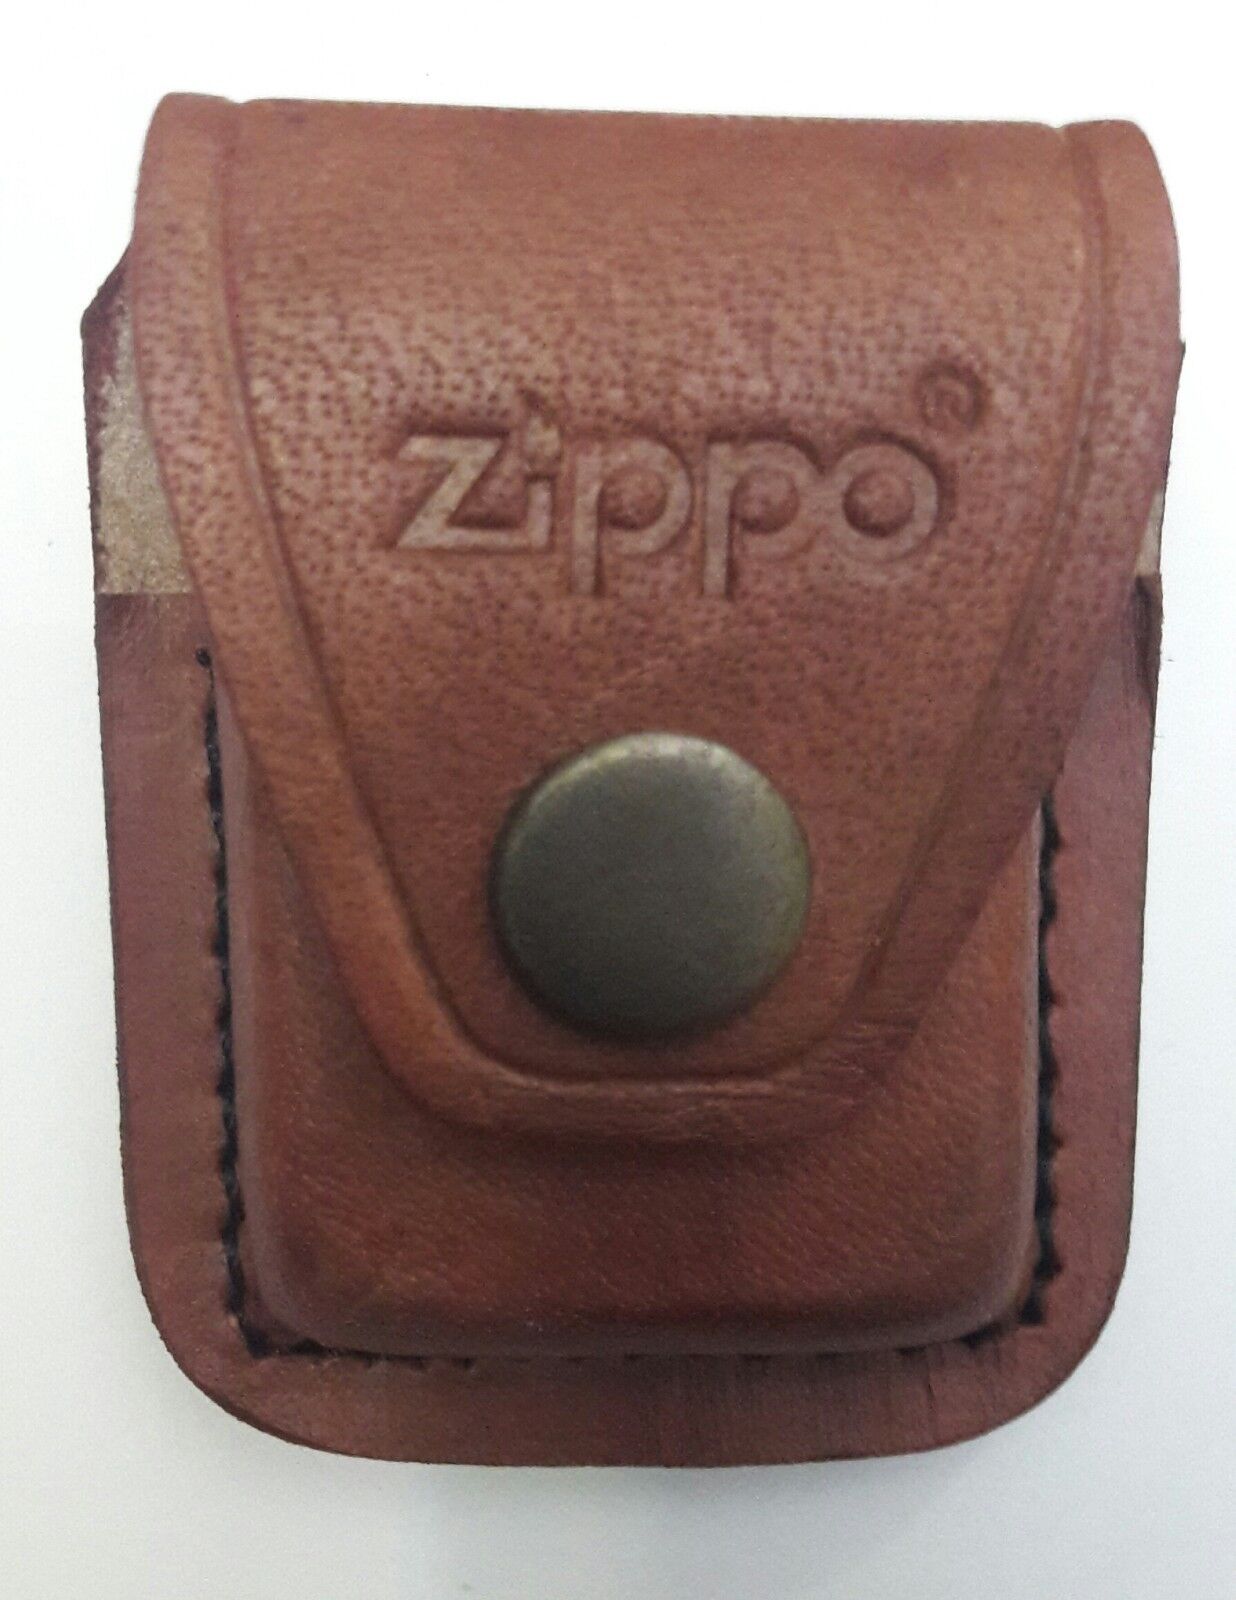 Zippo Lighter Leather Pouch Case Cover Holder With Loop In Different Colors New